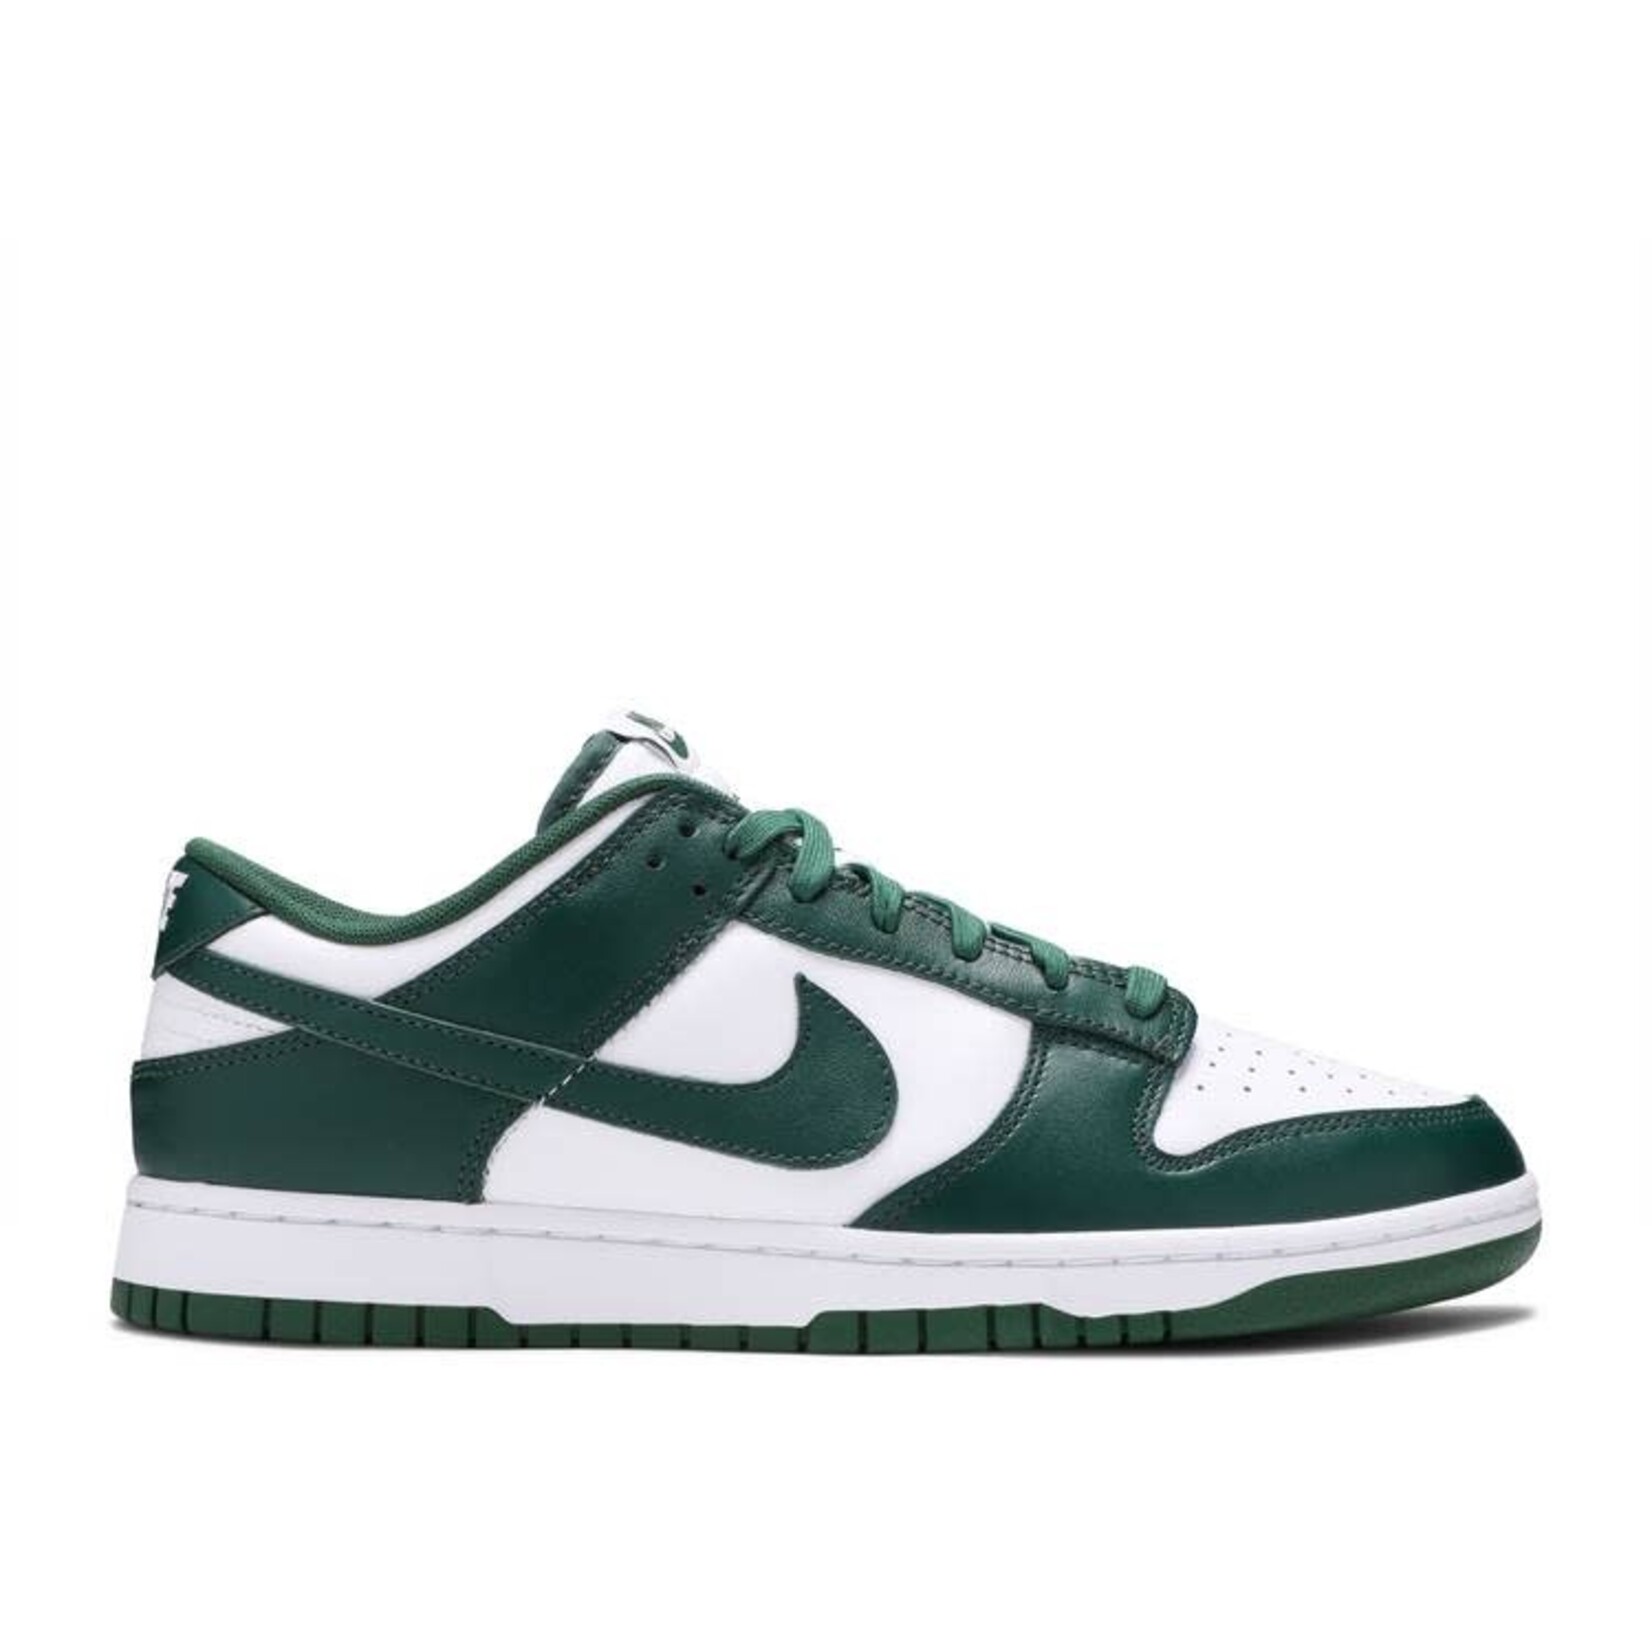 Nike Nike Dunk Low Michigan State Size 10, DS BRAND NEW